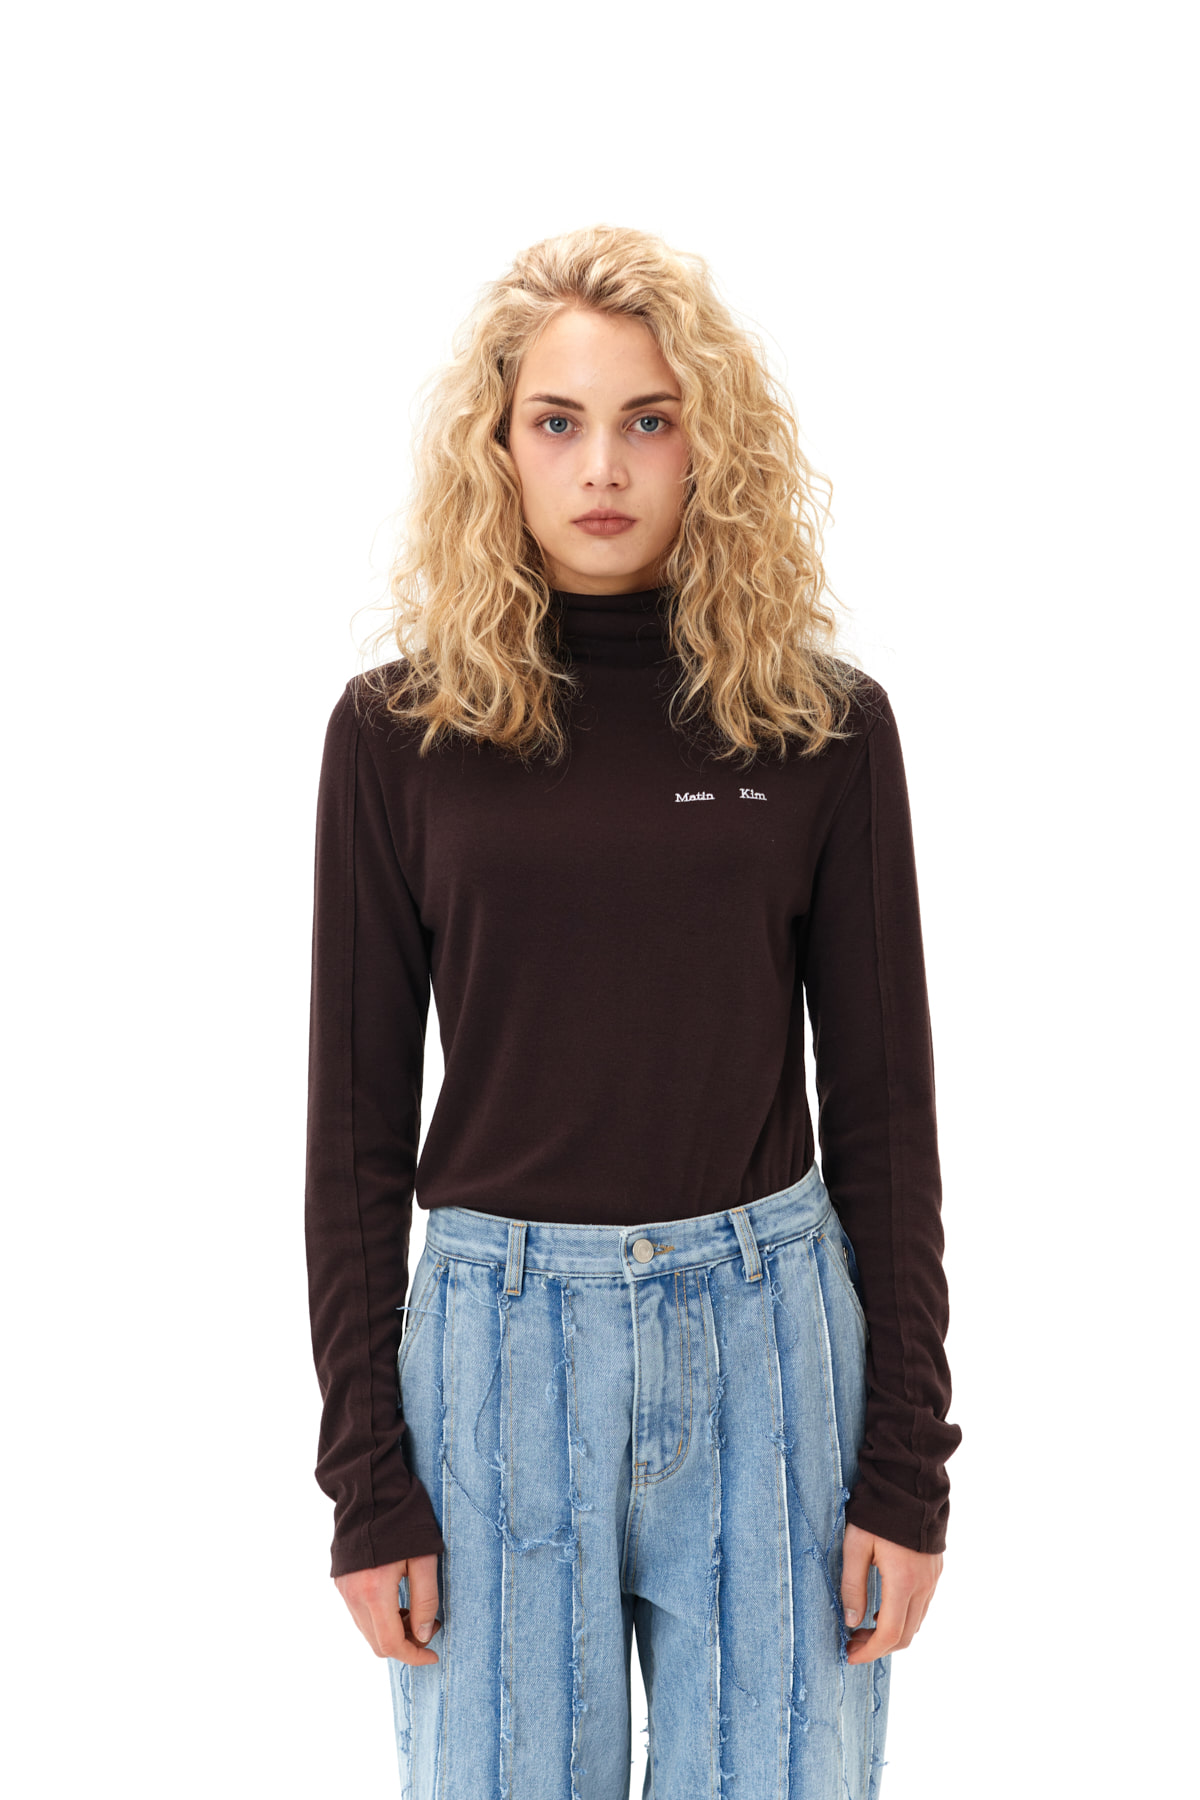 BASIC TURTLE NECK IN BROWN